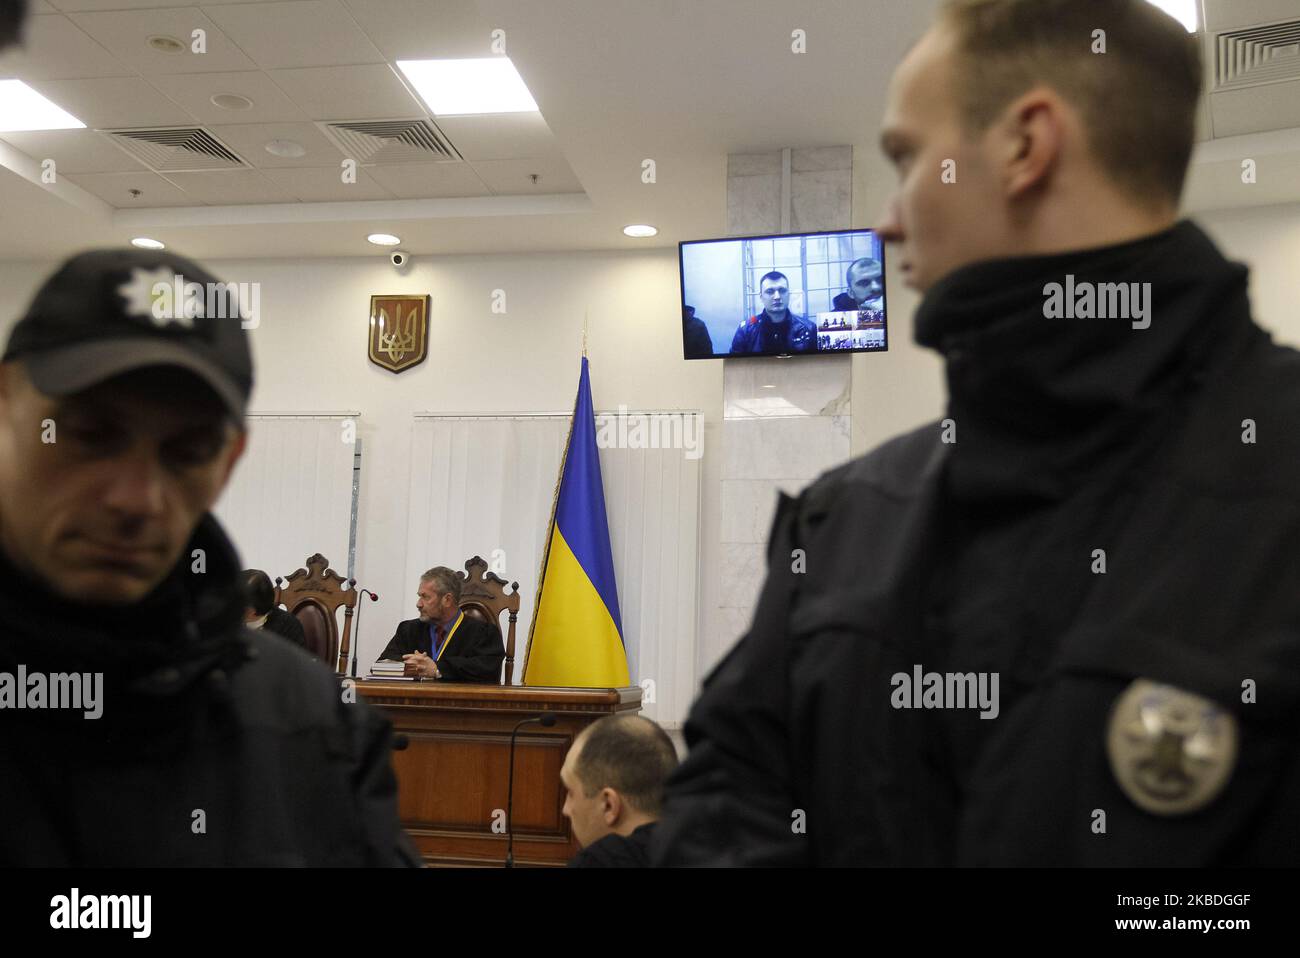 Ex-members of riot police Berkut Serhii Zinchenko,Pavlo Abroskin and Oleh Yanyshevsky, who accused in killing protestors during the Euromaidan or the Revolution of Dignity 2013-14, attend a court hearing via video link, at the Court of Appeal in Kyiv, Ukraine, on 27 December, 2019. (Photo by STR/NurPhoto) Stock Photo